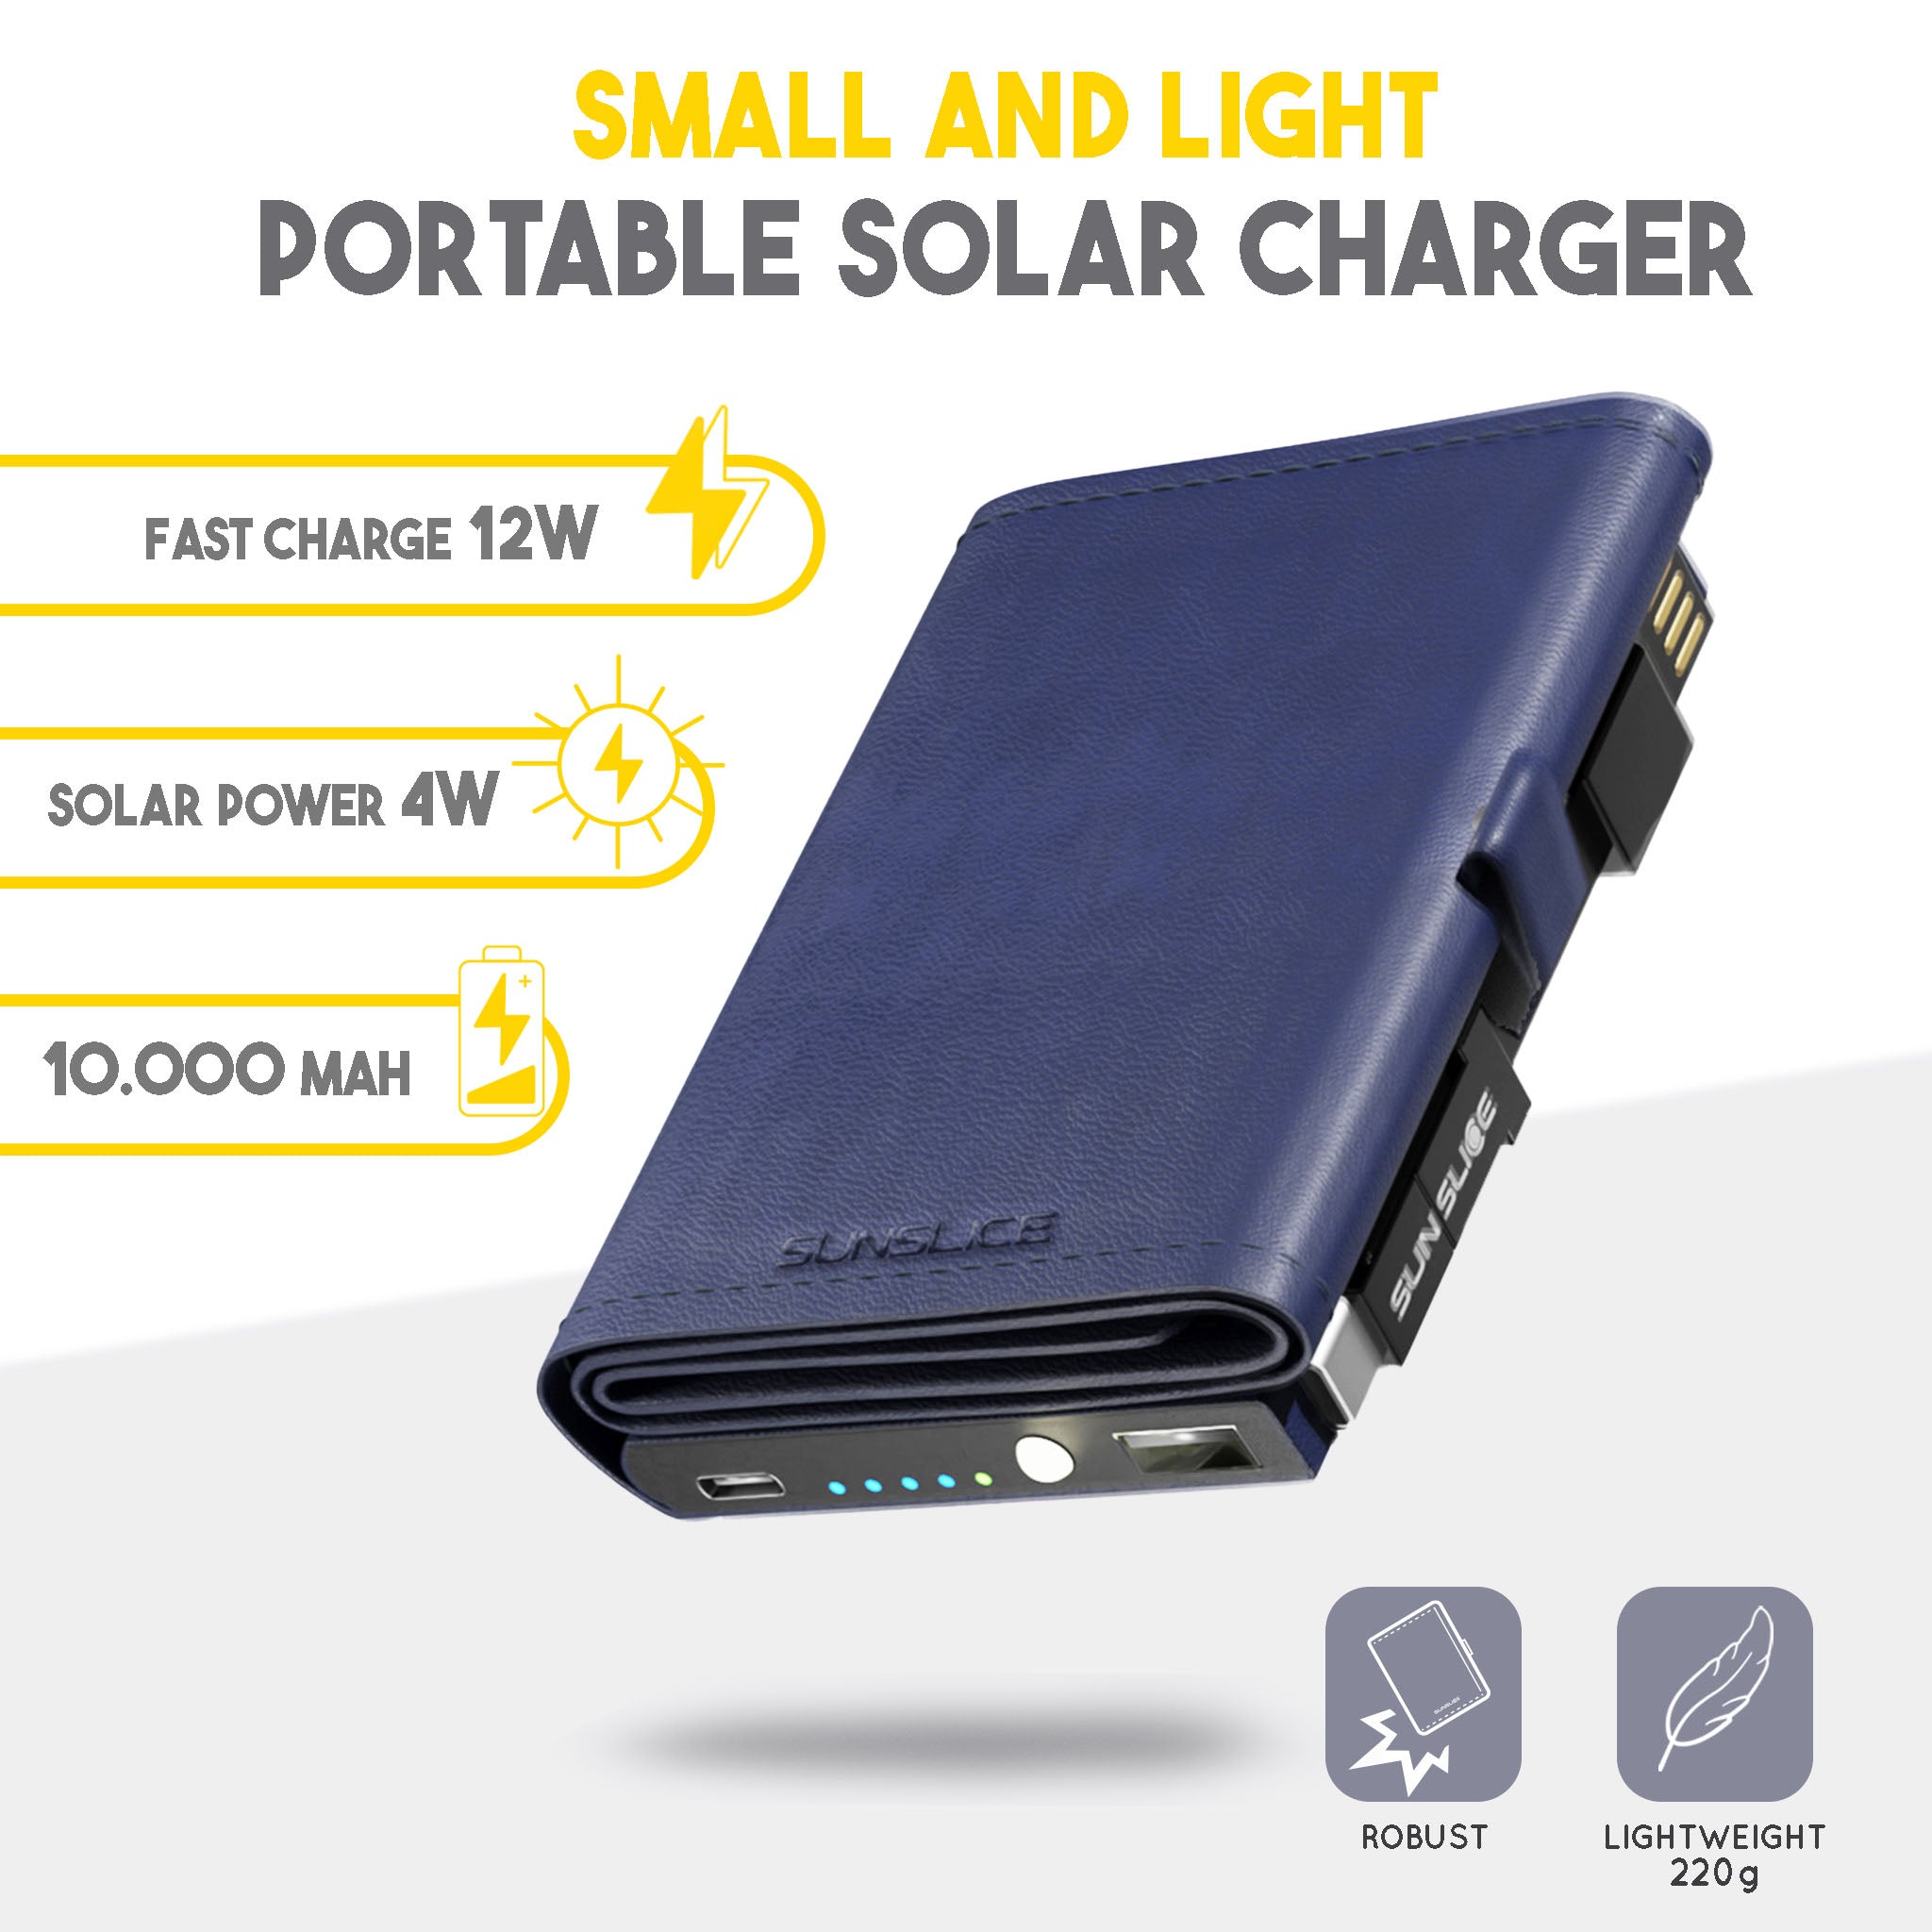 Small and light portable solar charger. Floating closed photon in the middle of the image